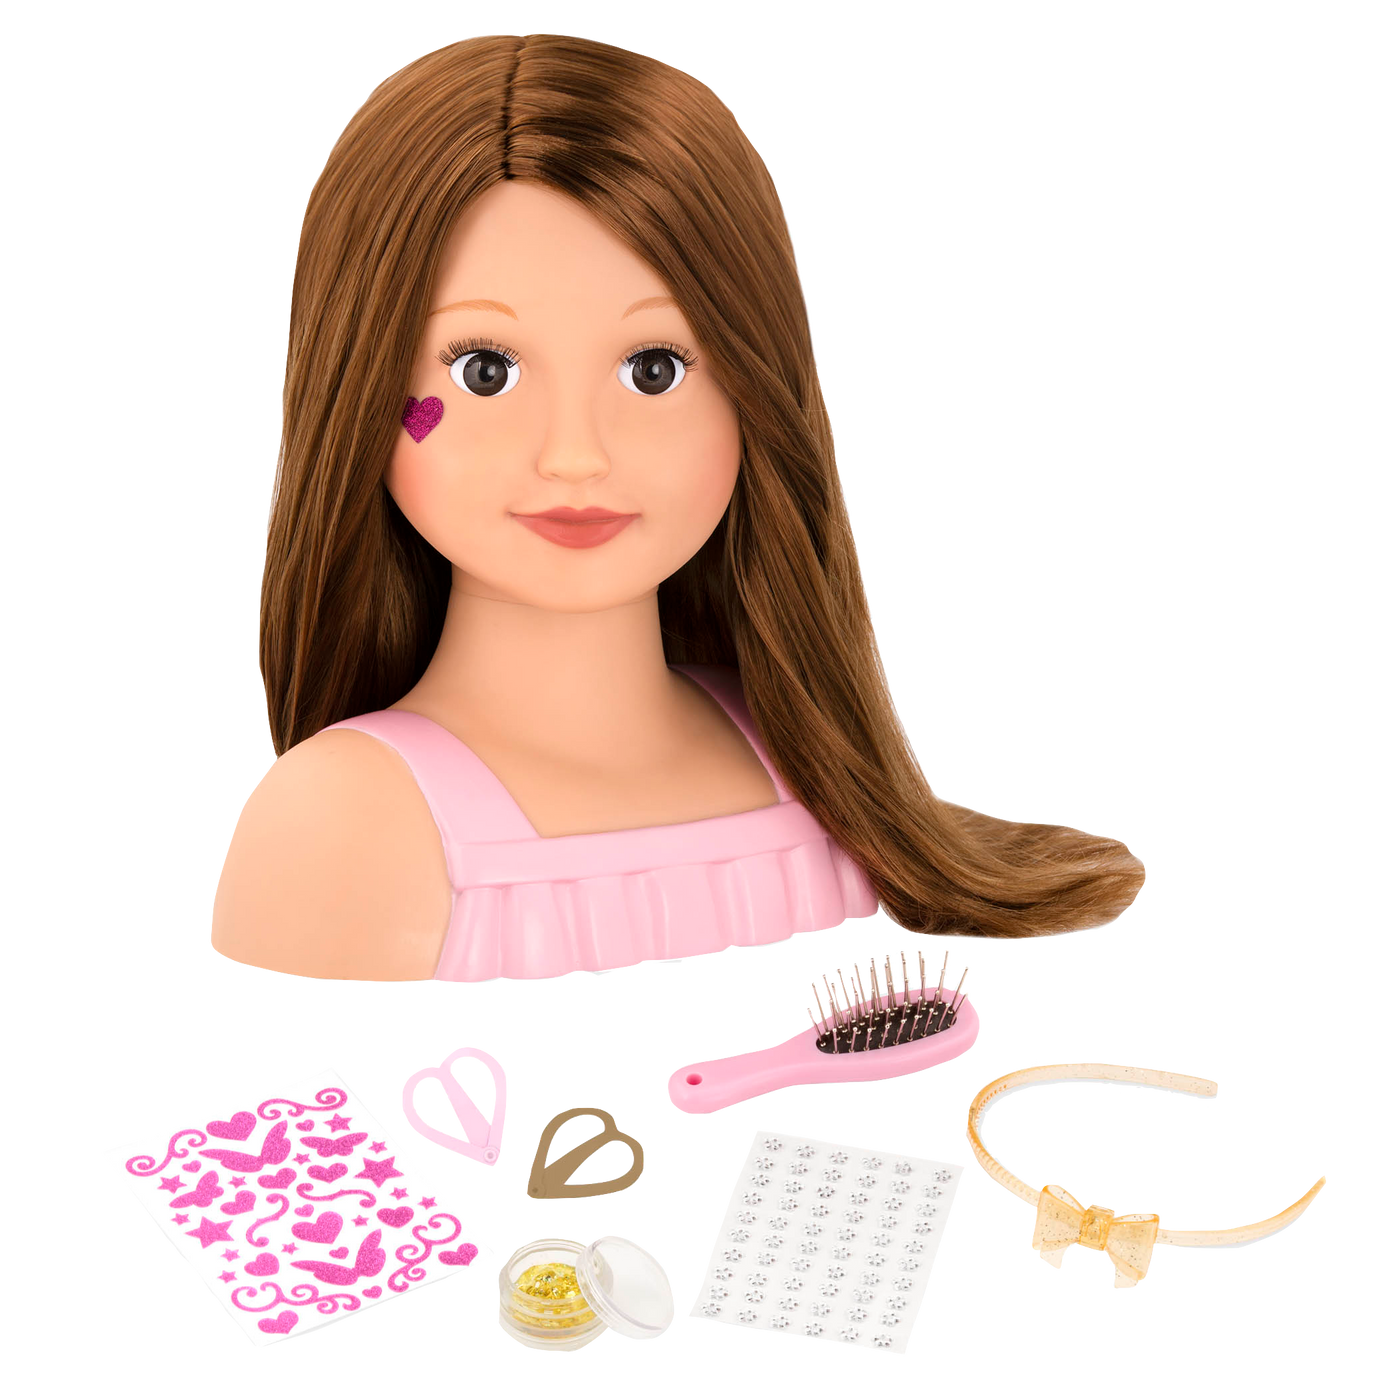 Brunette doll styling head with hair accessories